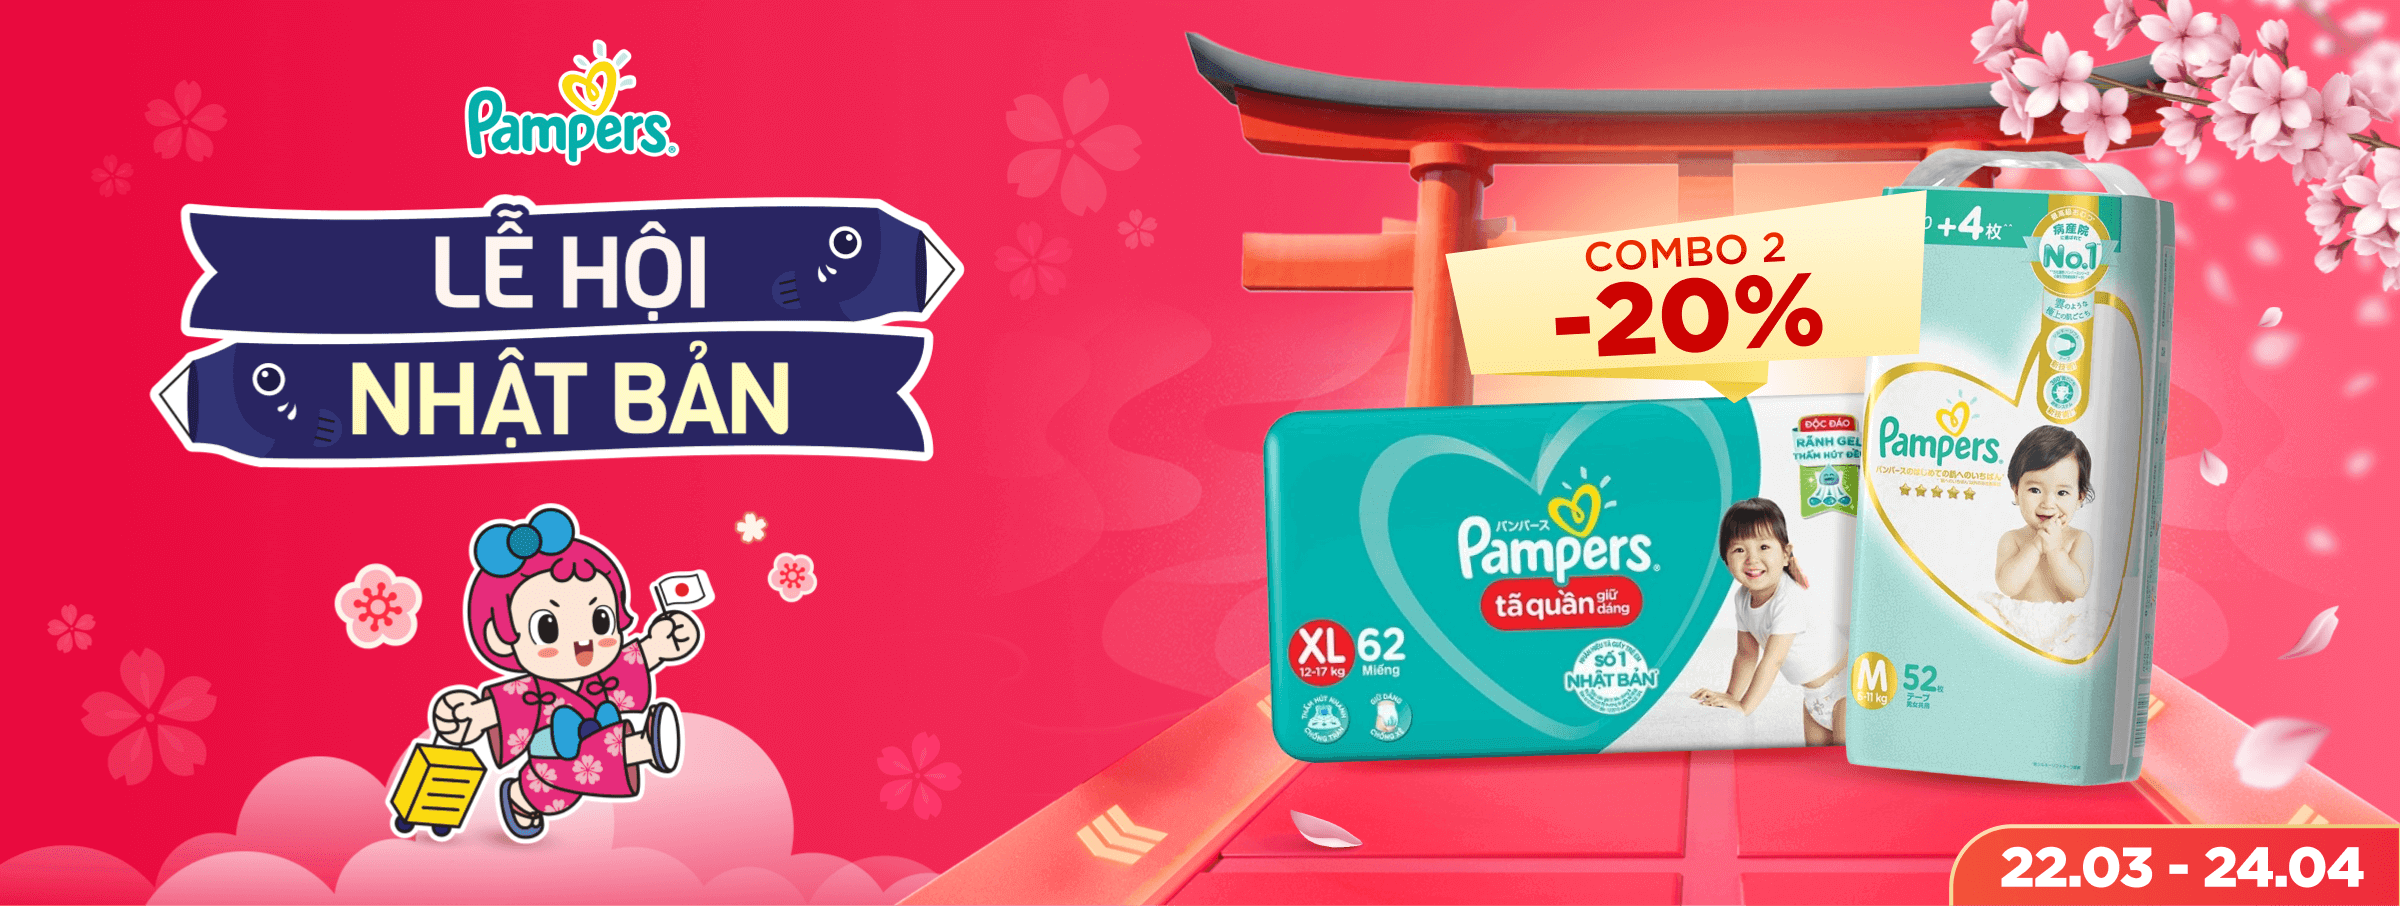 Pampers T04 - CATE